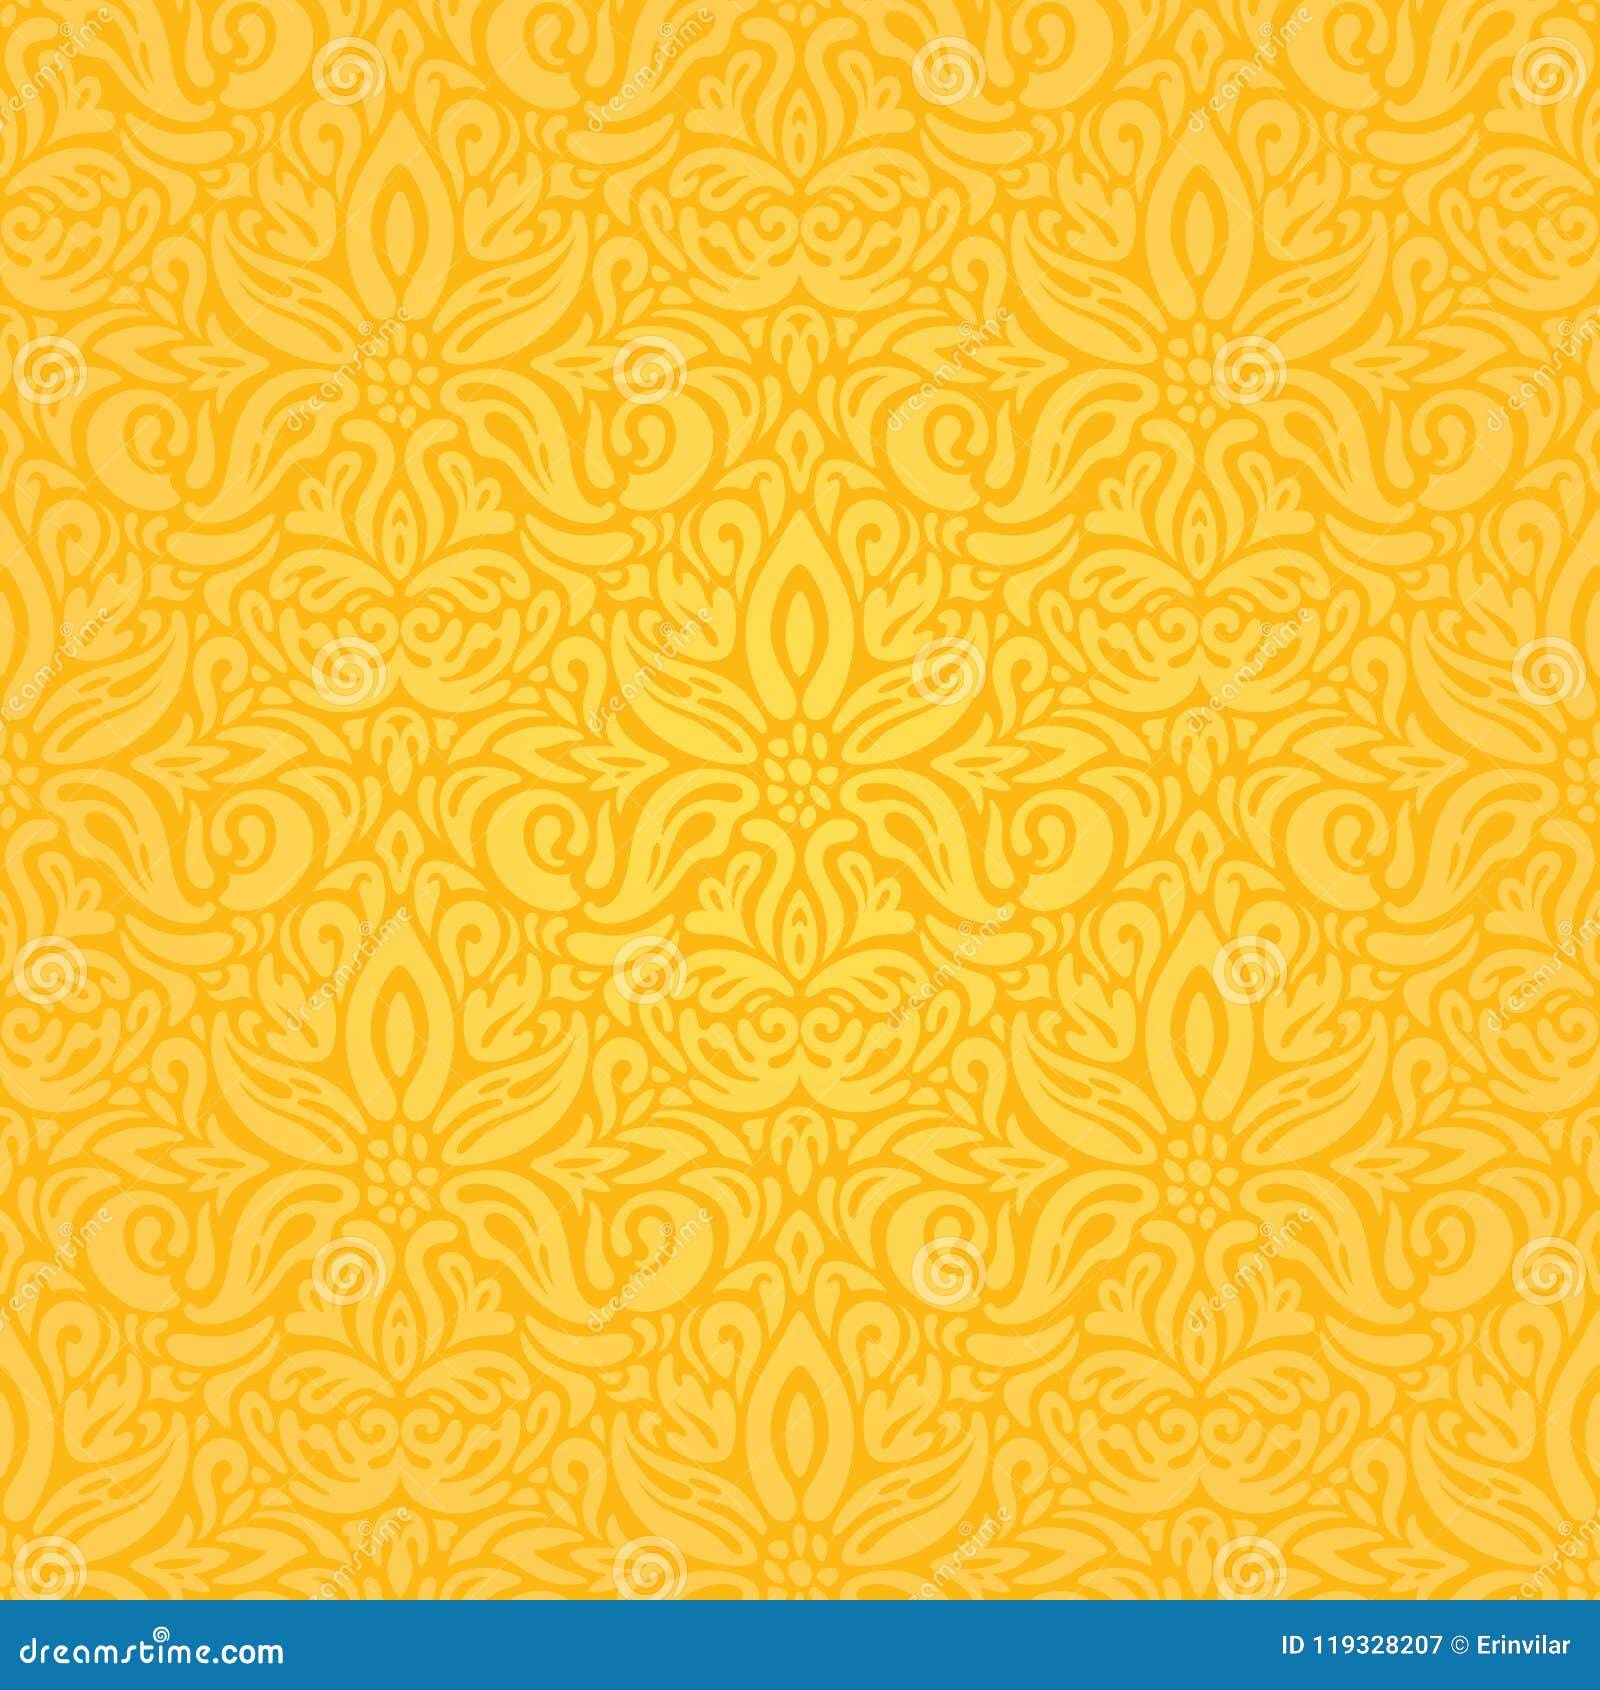 Yellow Colorful Floral Wallpaper Background Floral Pattern Stock Vector -  Illustration of flower, elegant: 119328207